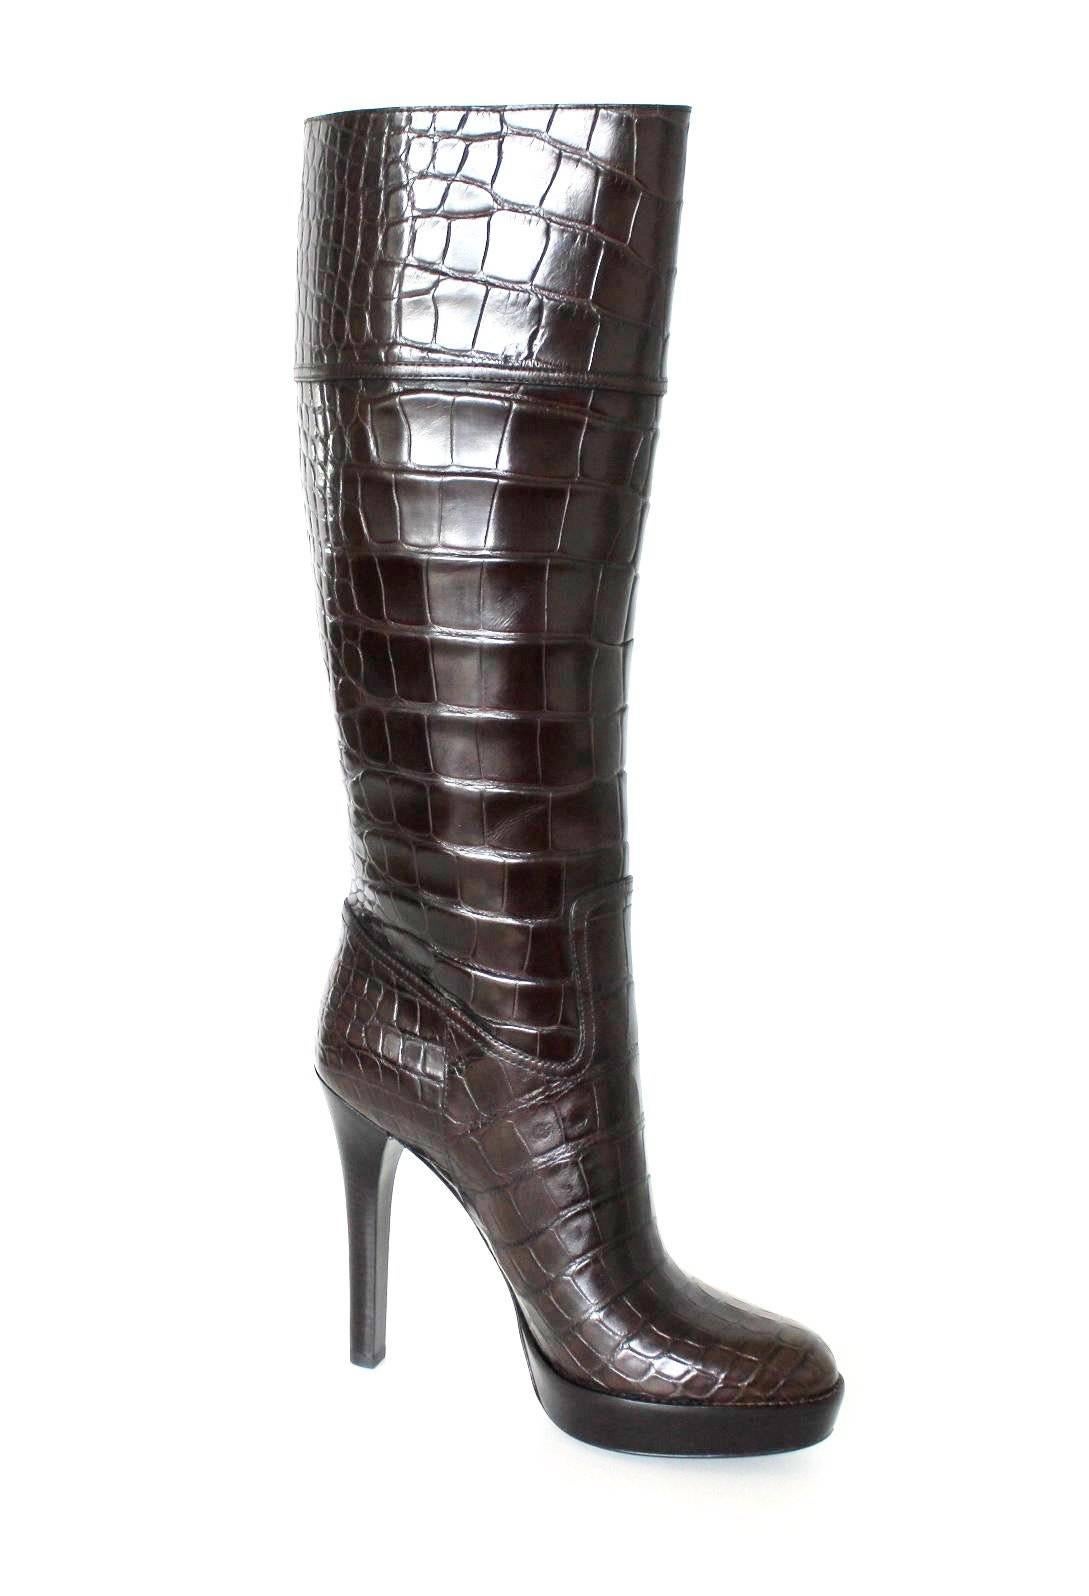 Black NEW Gucci Exotic Brown Extra Tall Alligator Skin High Heels Boots 17899$ 41 For Sale